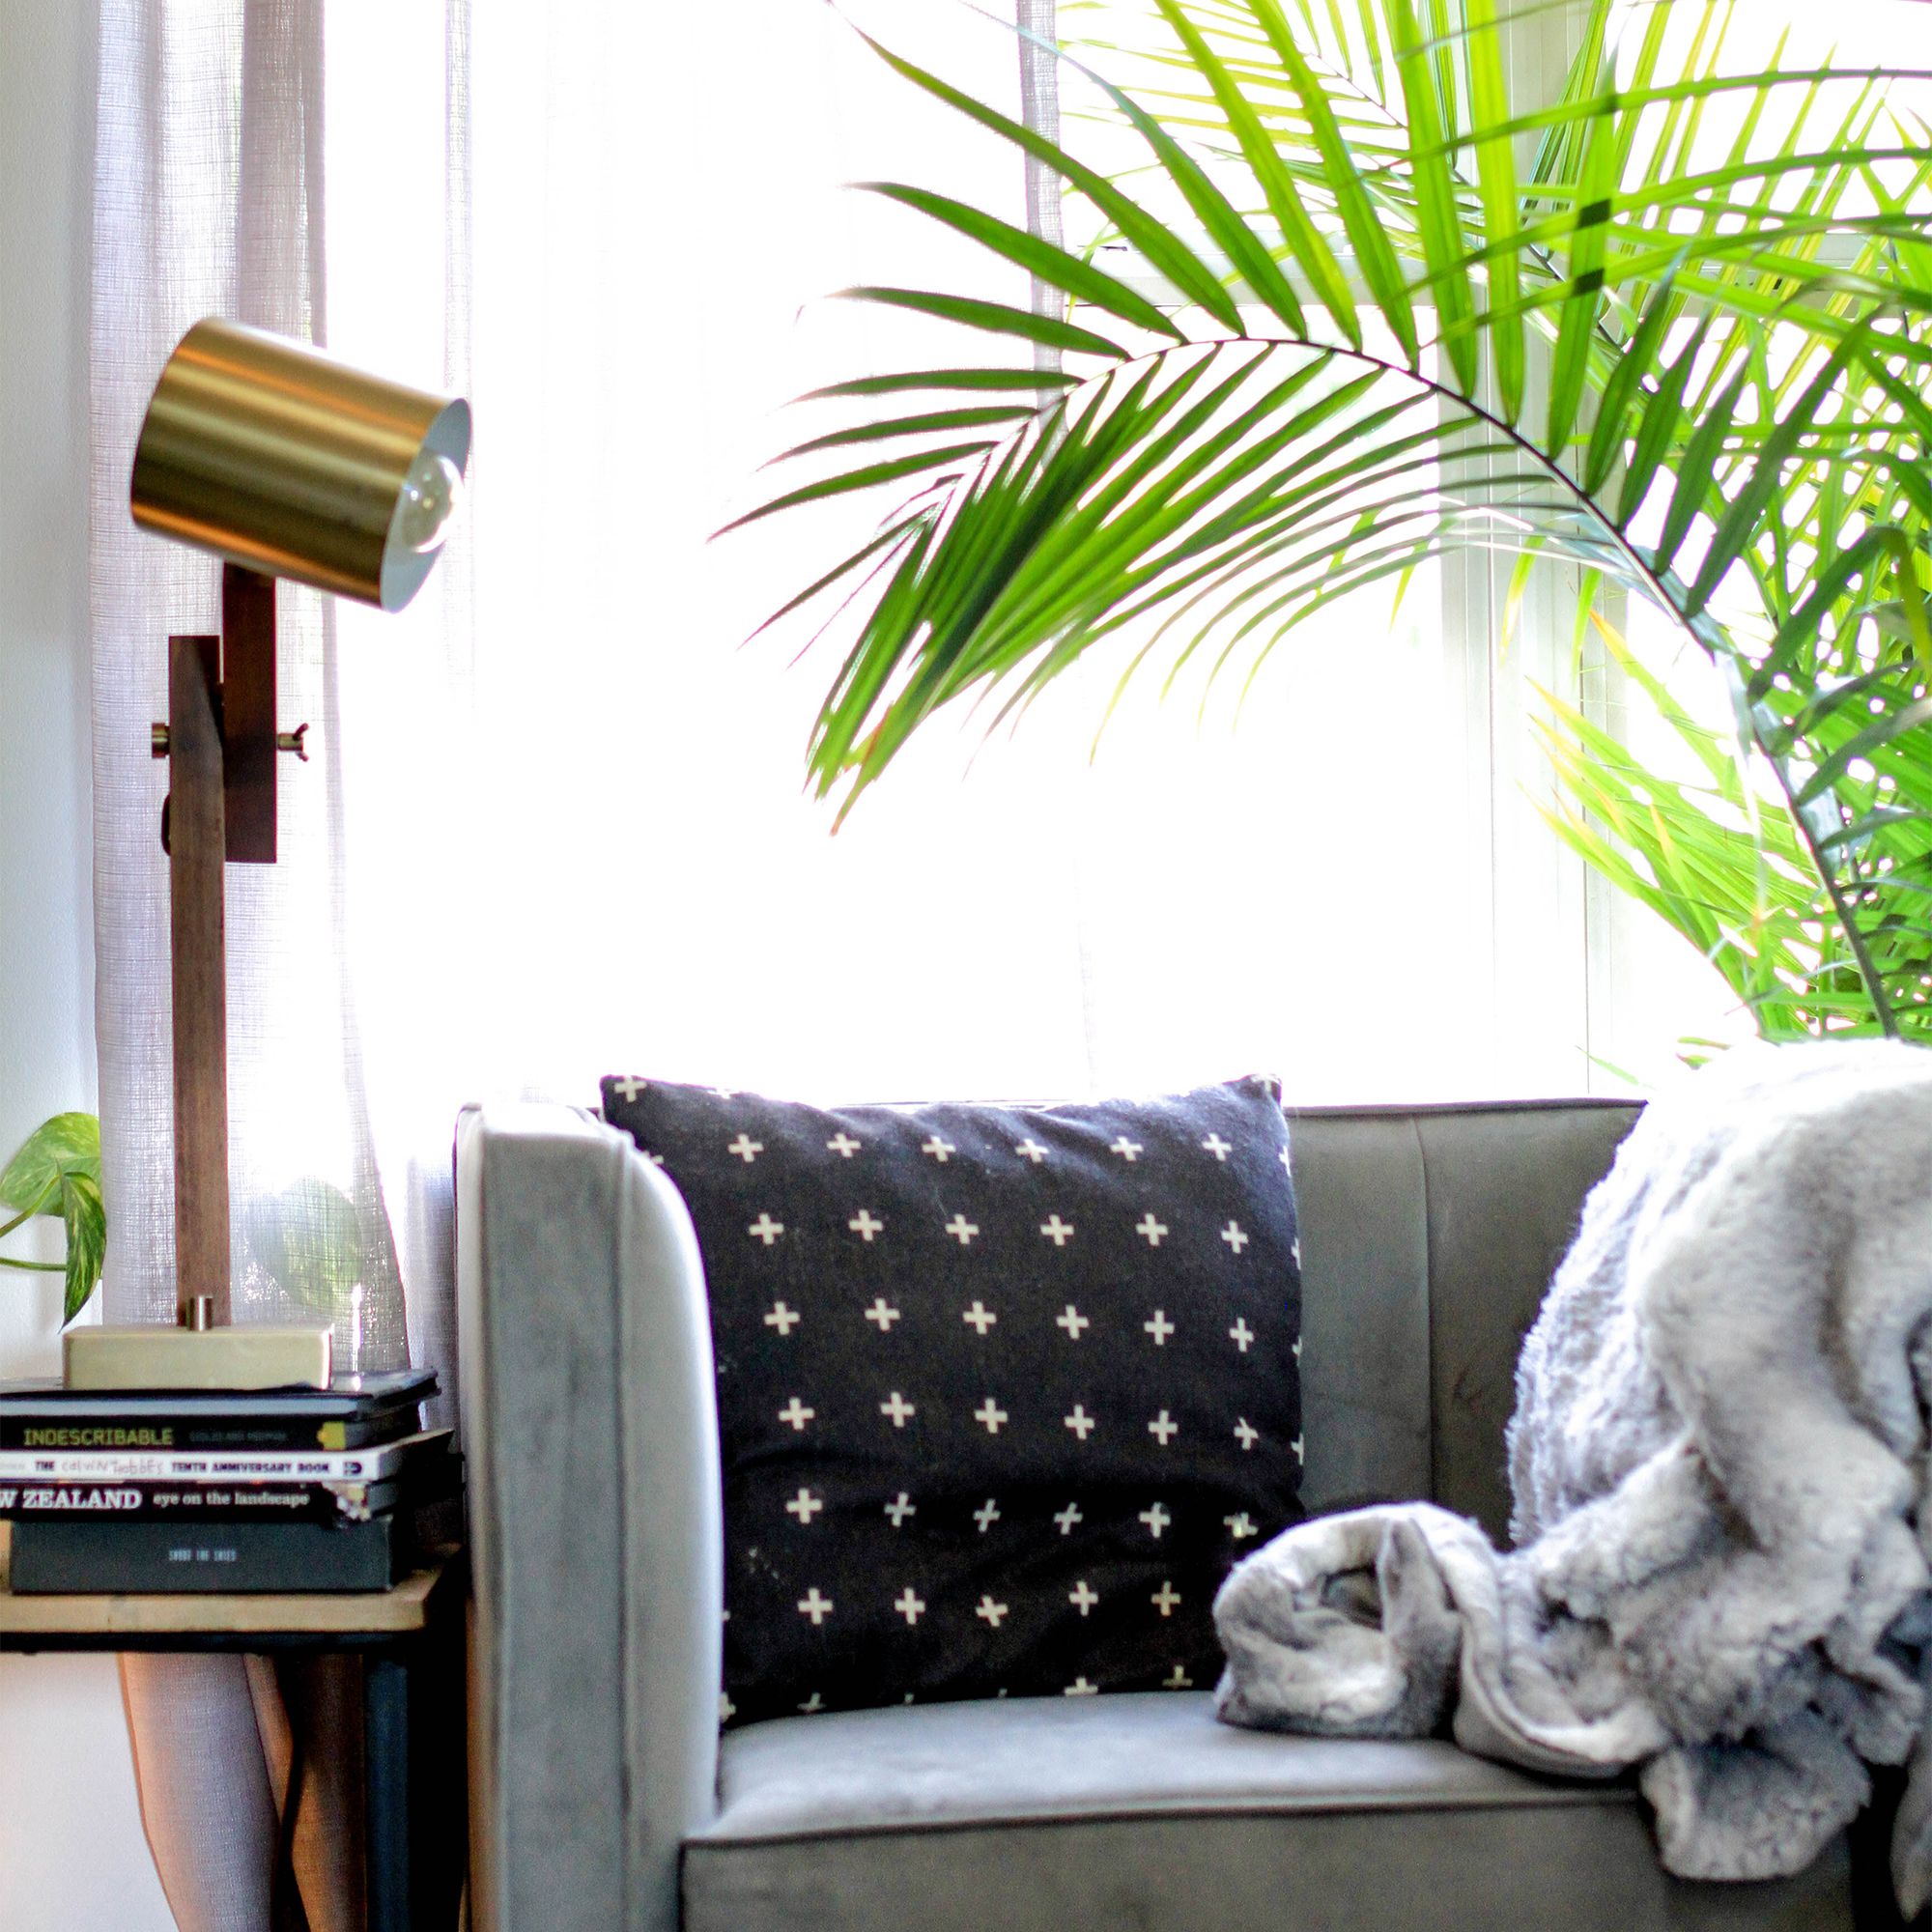 6 ways to turn your living room into a cosy snug pic